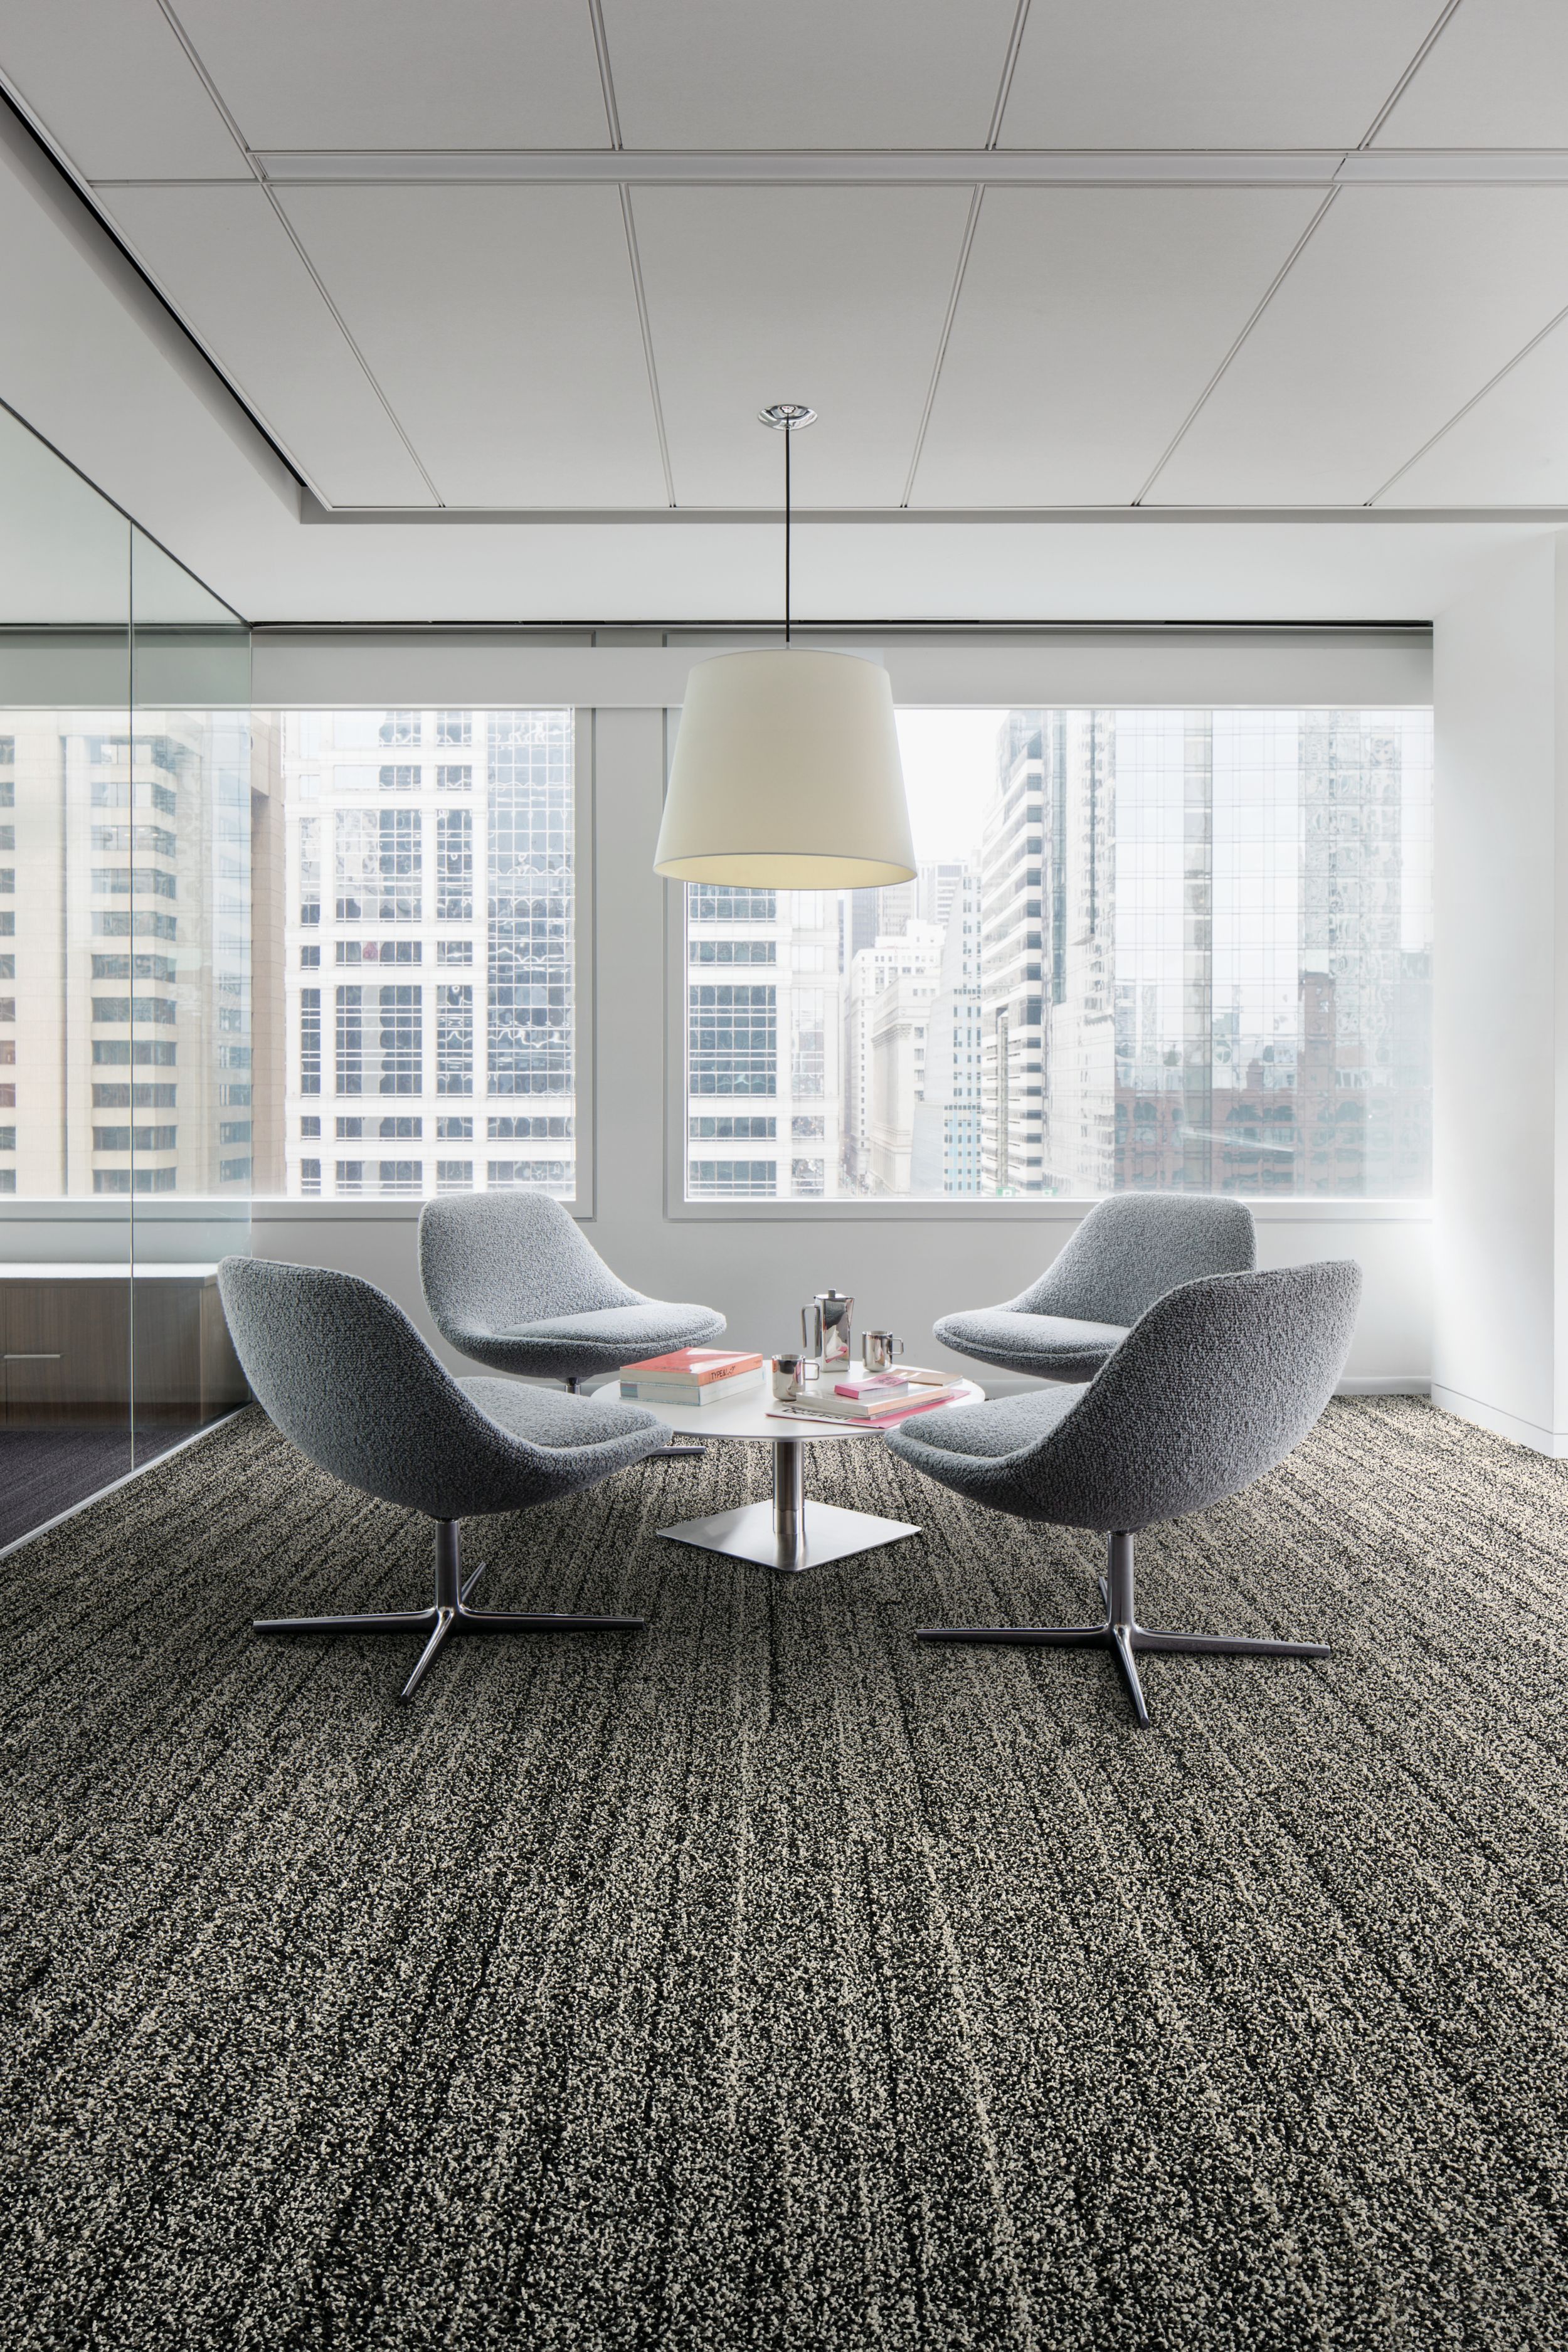 image Interface Overedge plank carpet tile with fabric chairs around round table numéro 6